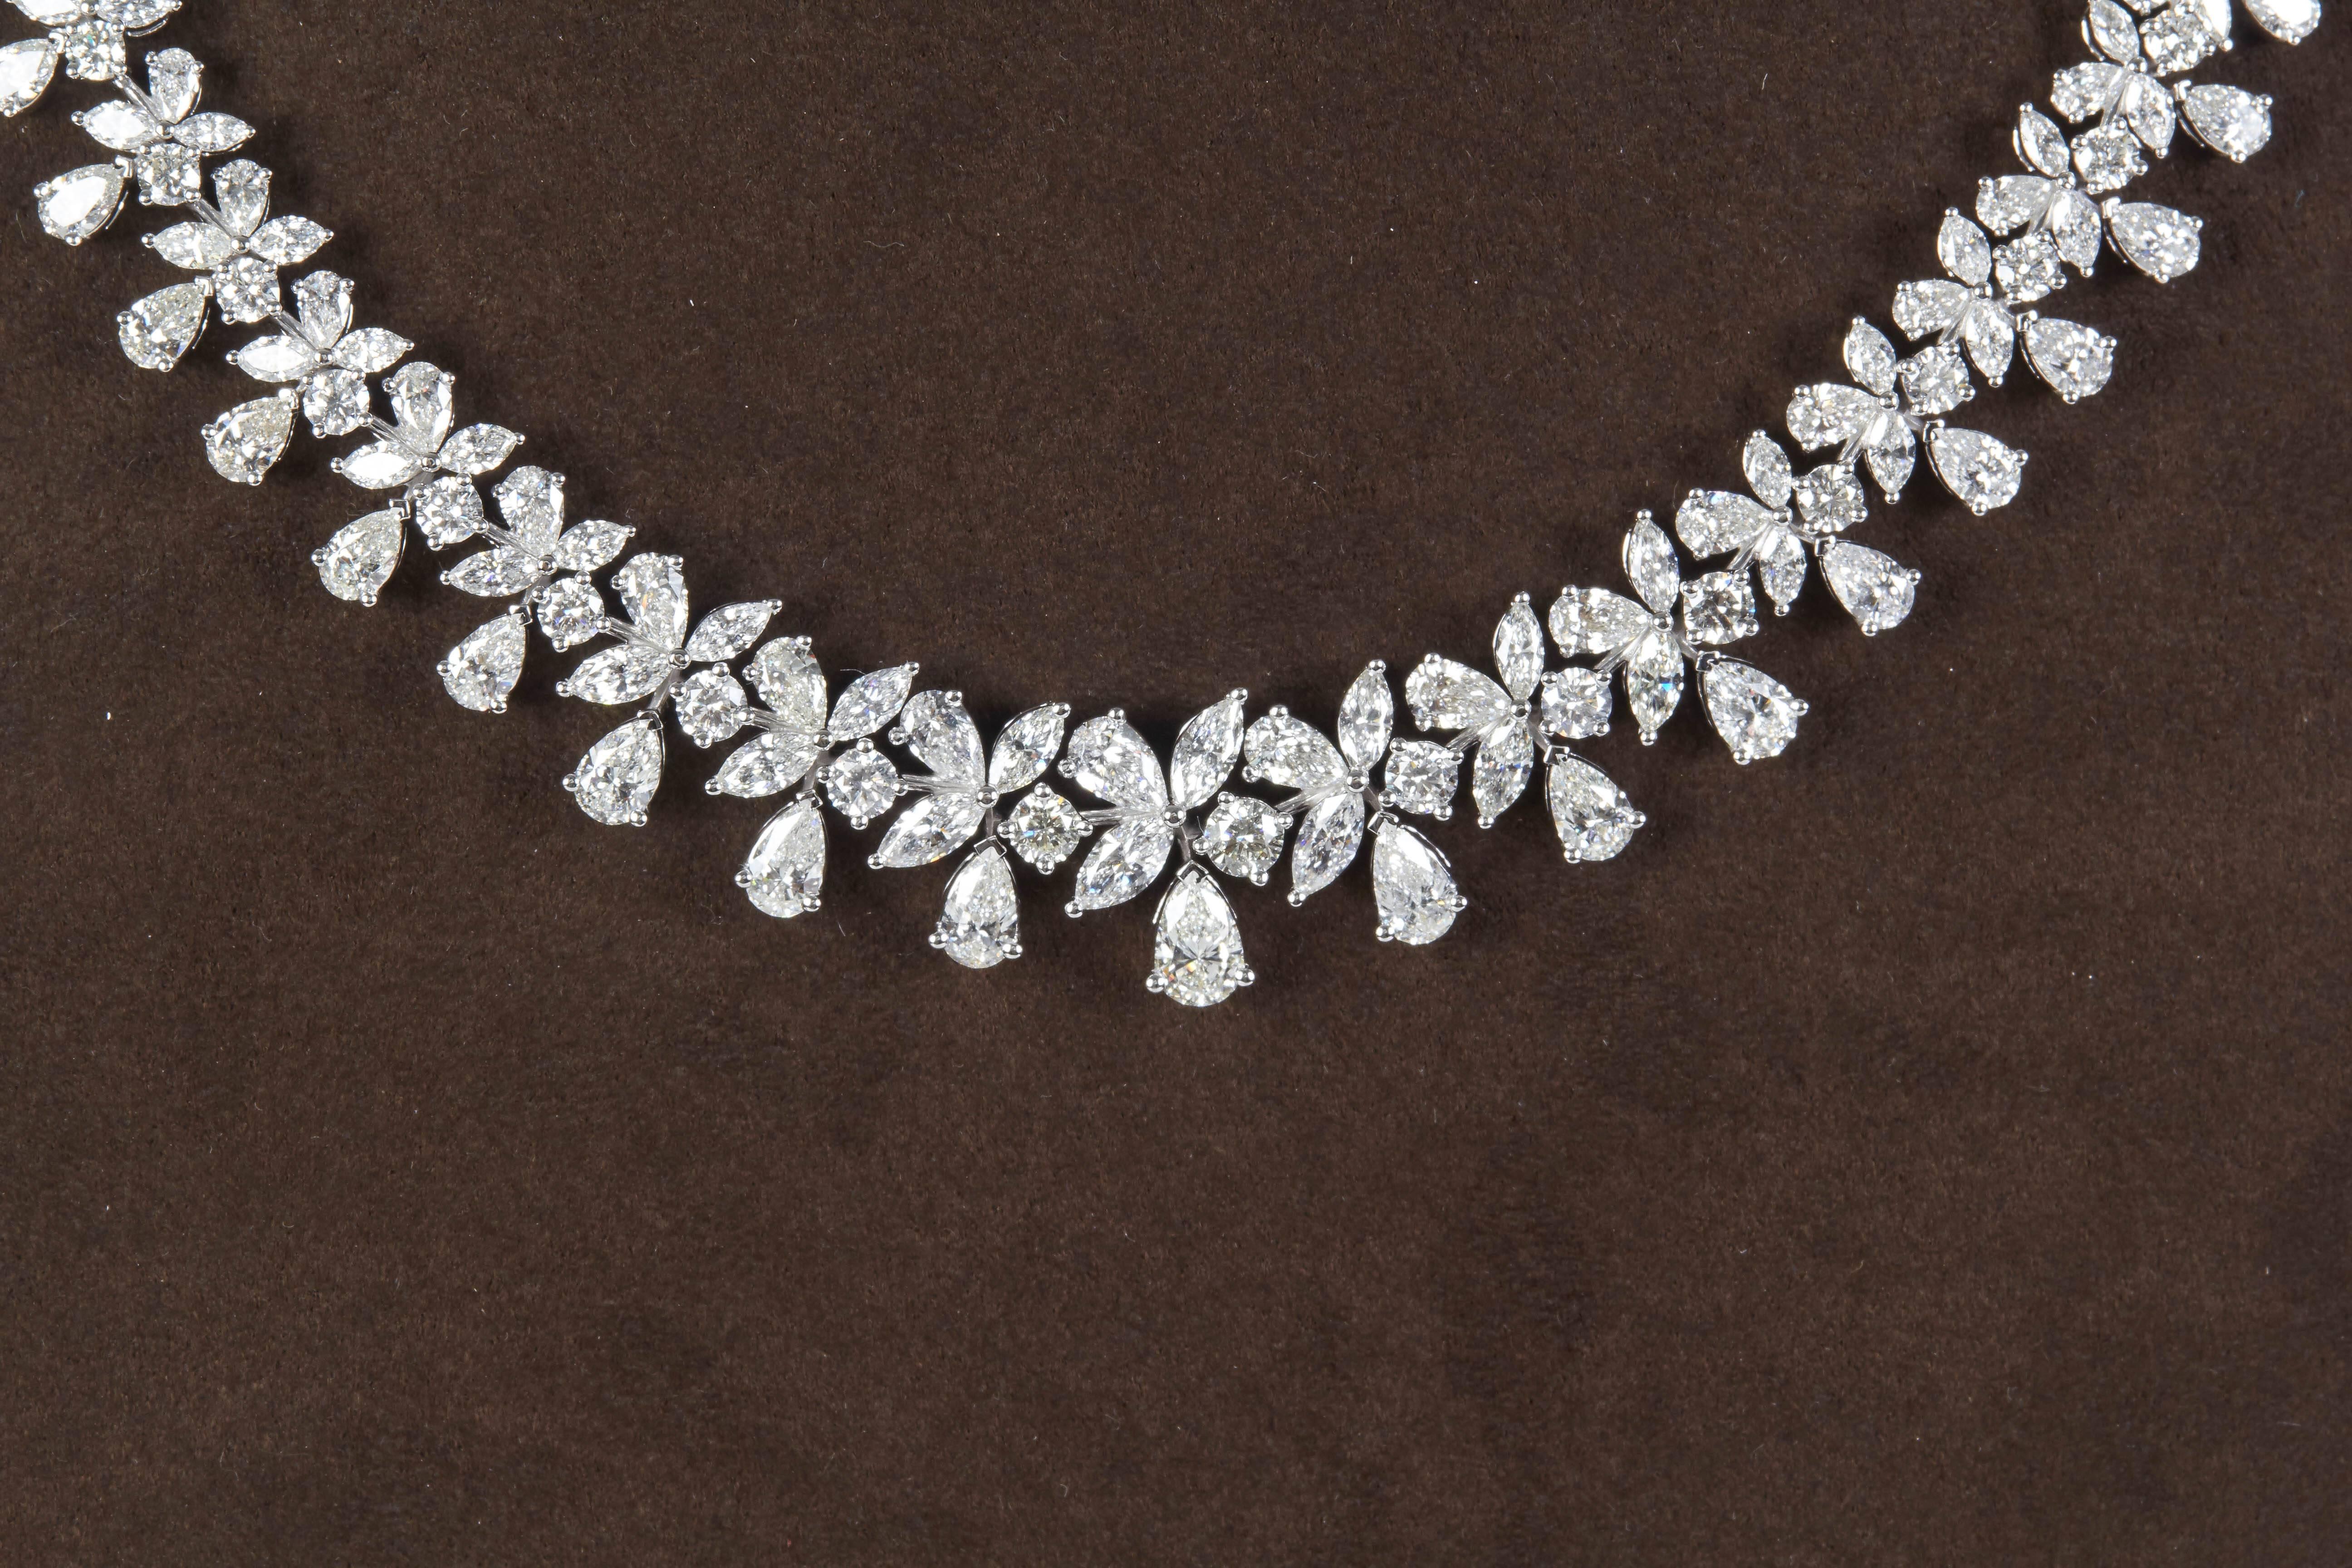 

A fabulous necklace in a timeless design.

26.40 carats of round, pear, and marquise shaped diamonds all set in 18k white gold. 

A wearable piece with a very rich look and design. 

Please contact us for more information.